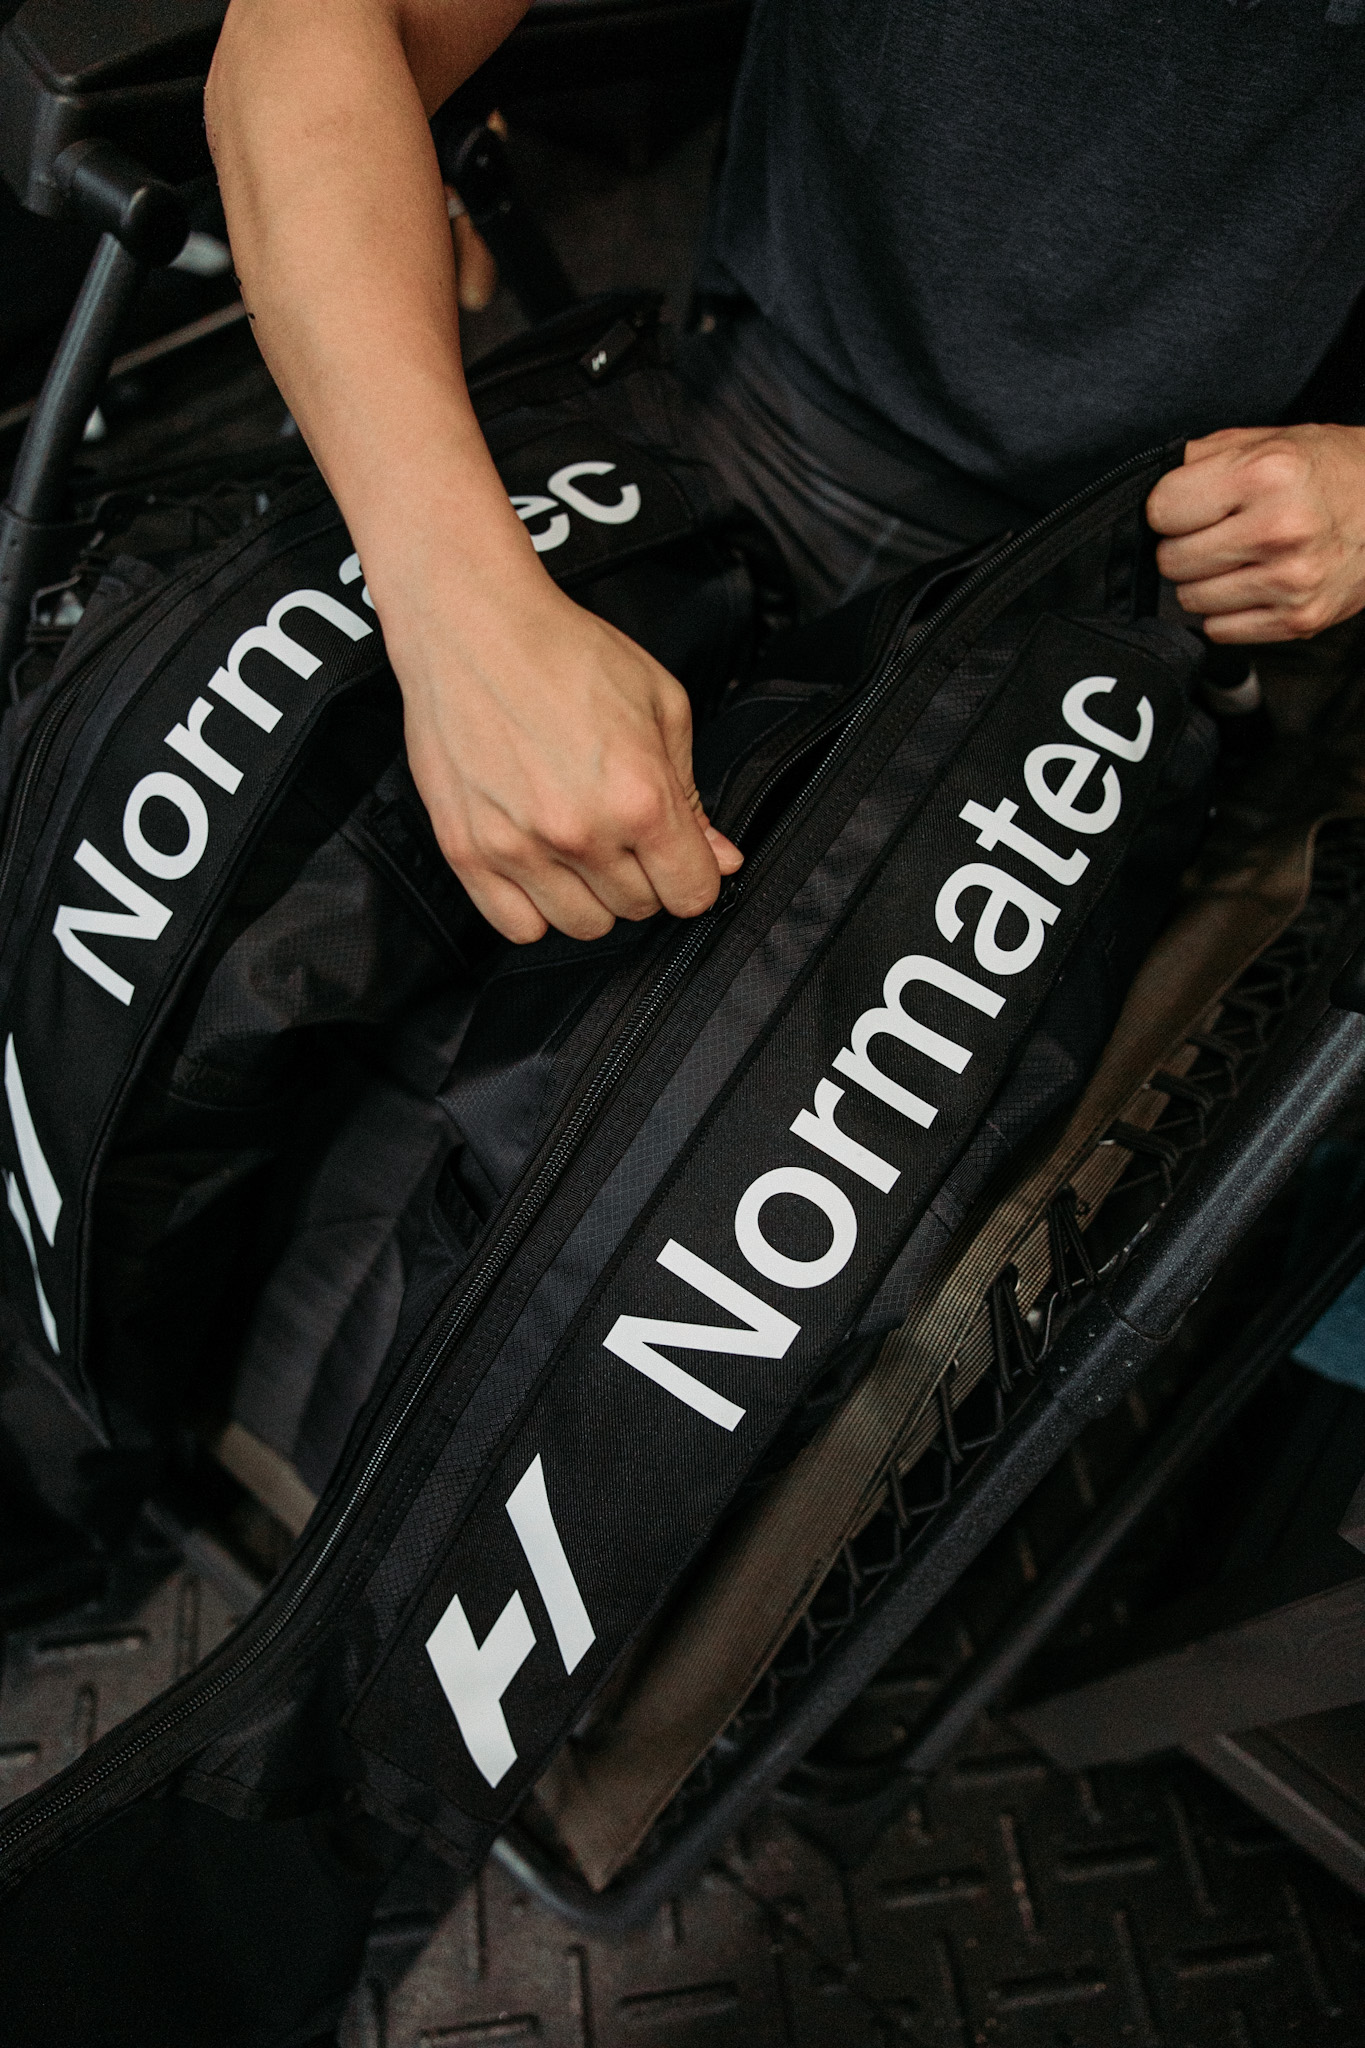 Our clinic has all Normatec compression devices and attachments.